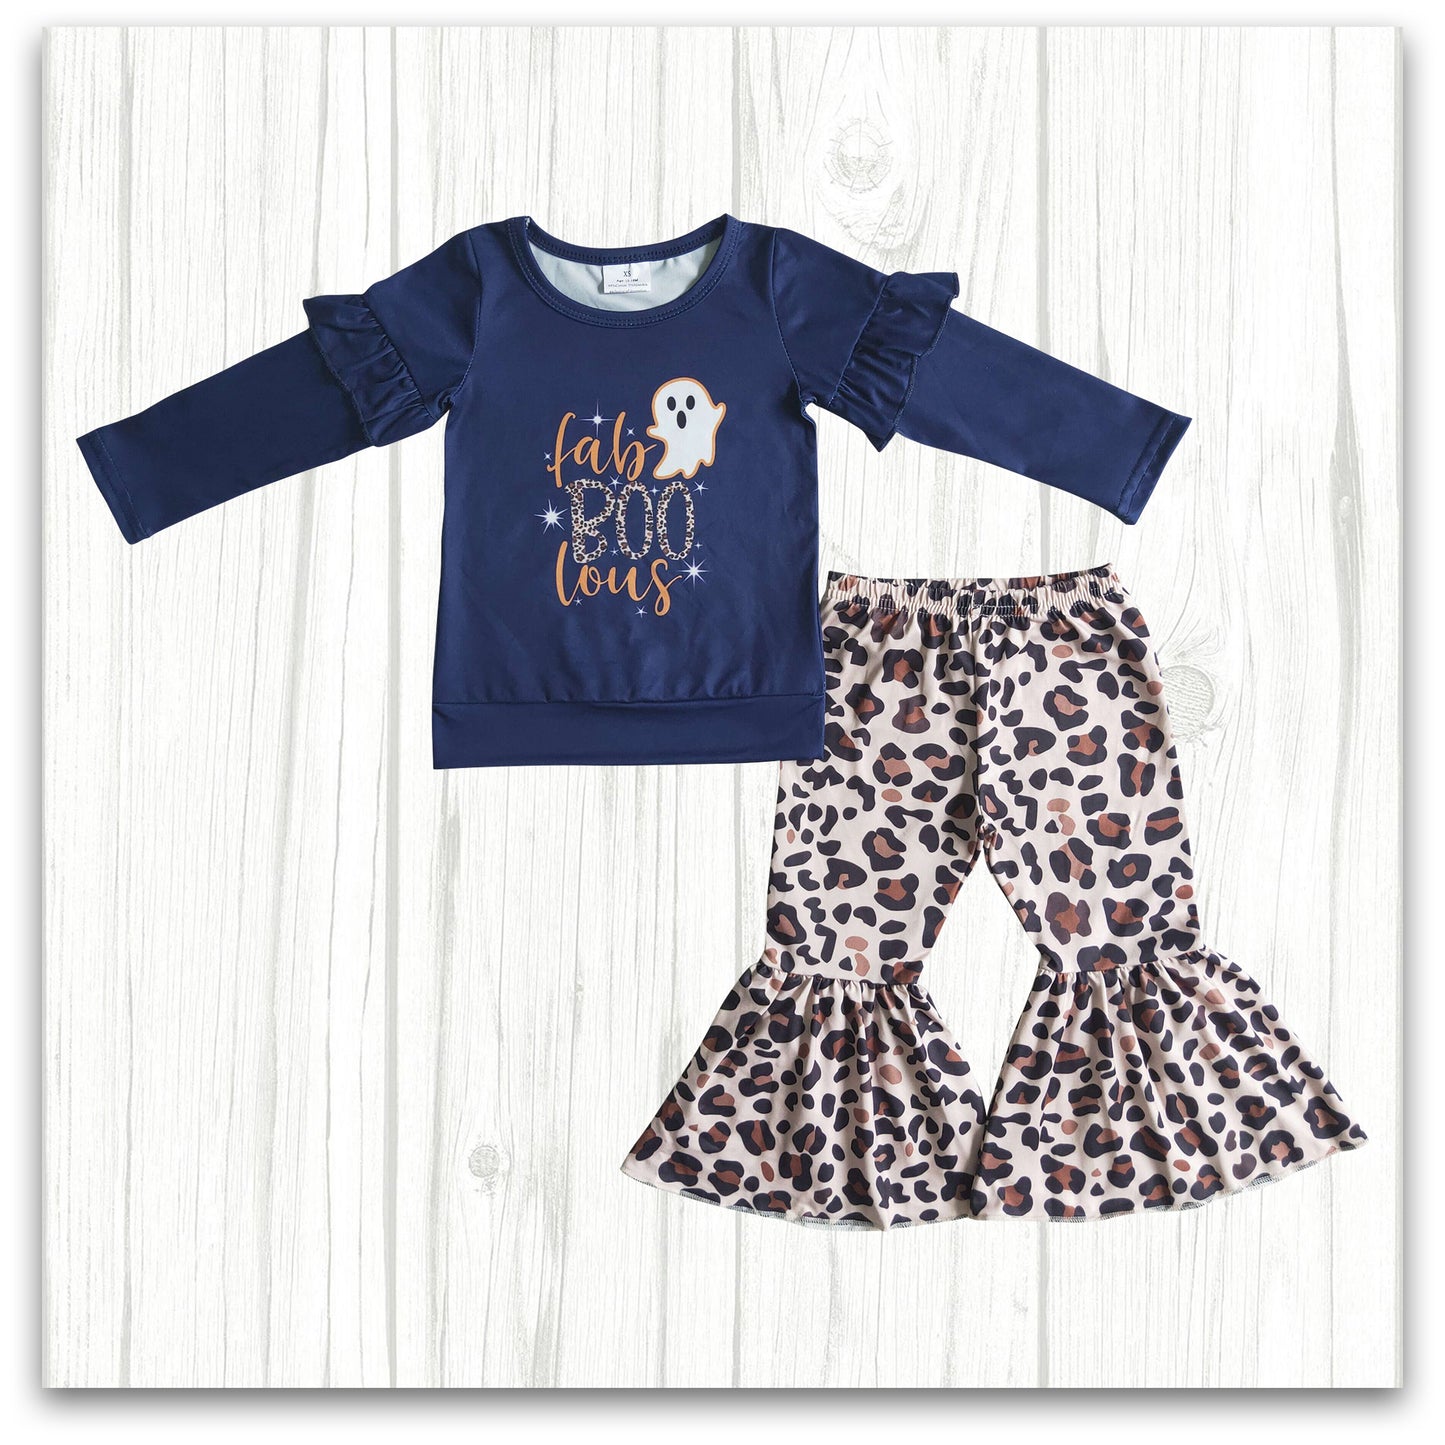 fablous boo leopard girls halloween outfit